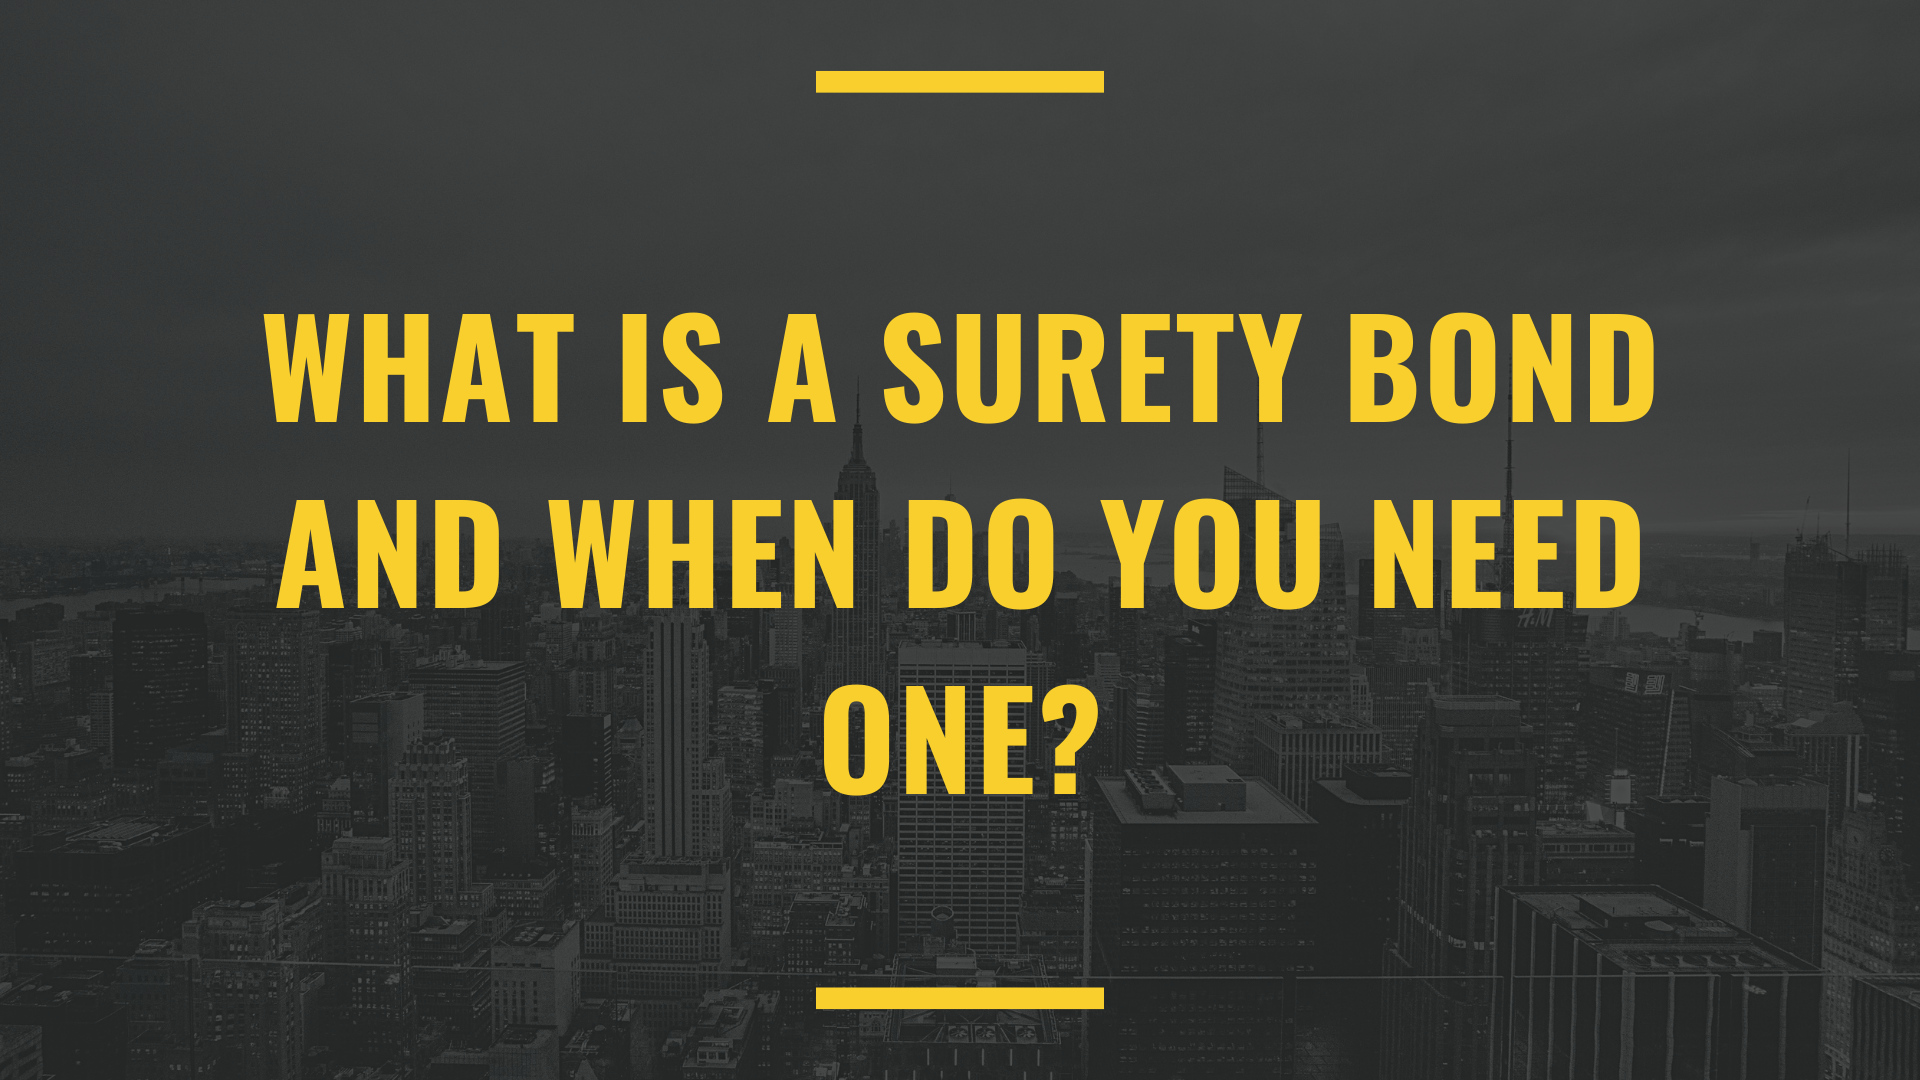 surety bond - what is a surety bond - top view of buildings